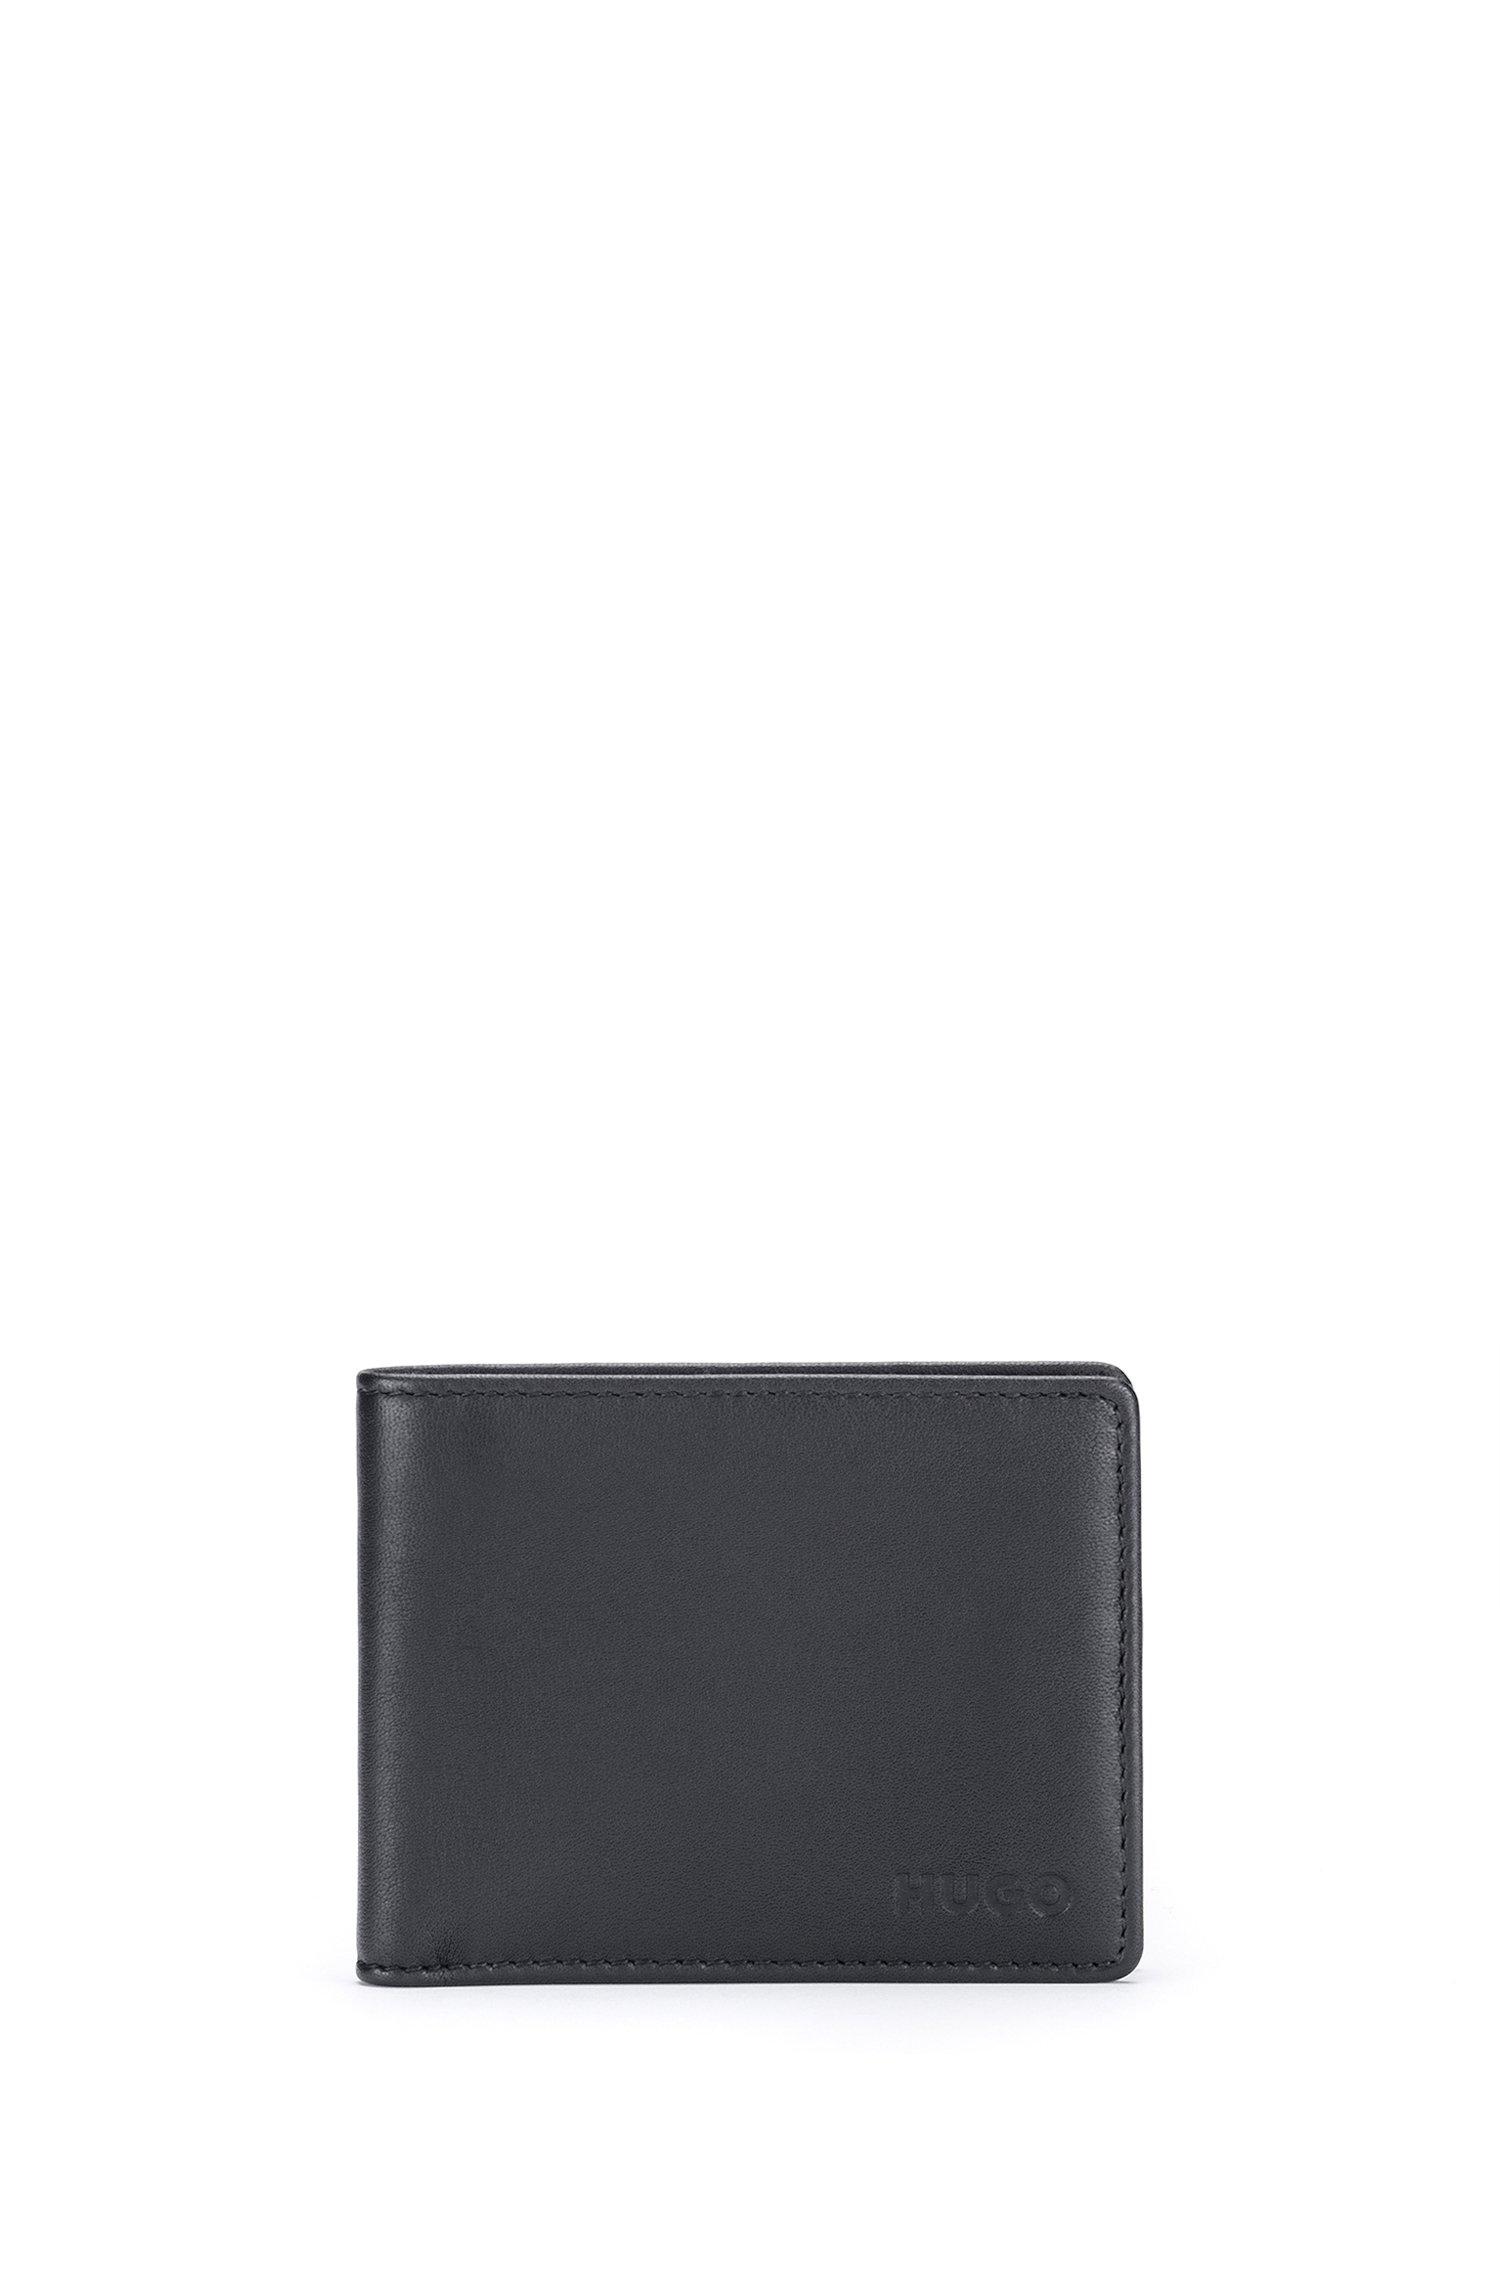 HUGO Leather Wallet With Full Lining And Embossed Logos- Black Men's ...